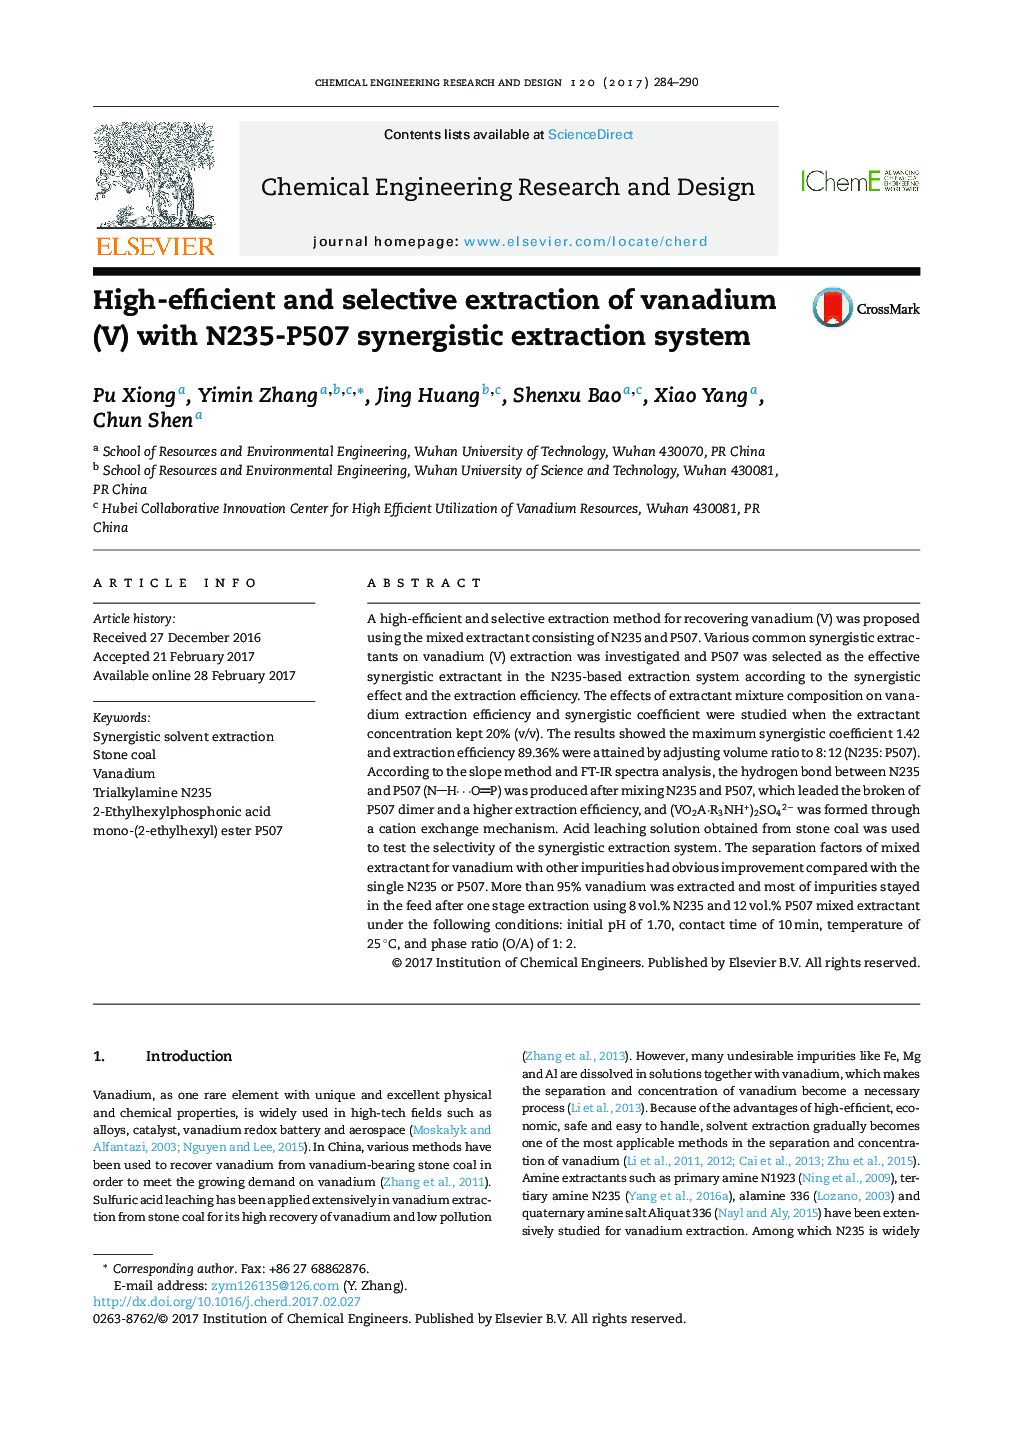 High-efficient and selective extraction of vanadium (V) with N235-P507 synergistic extraction system